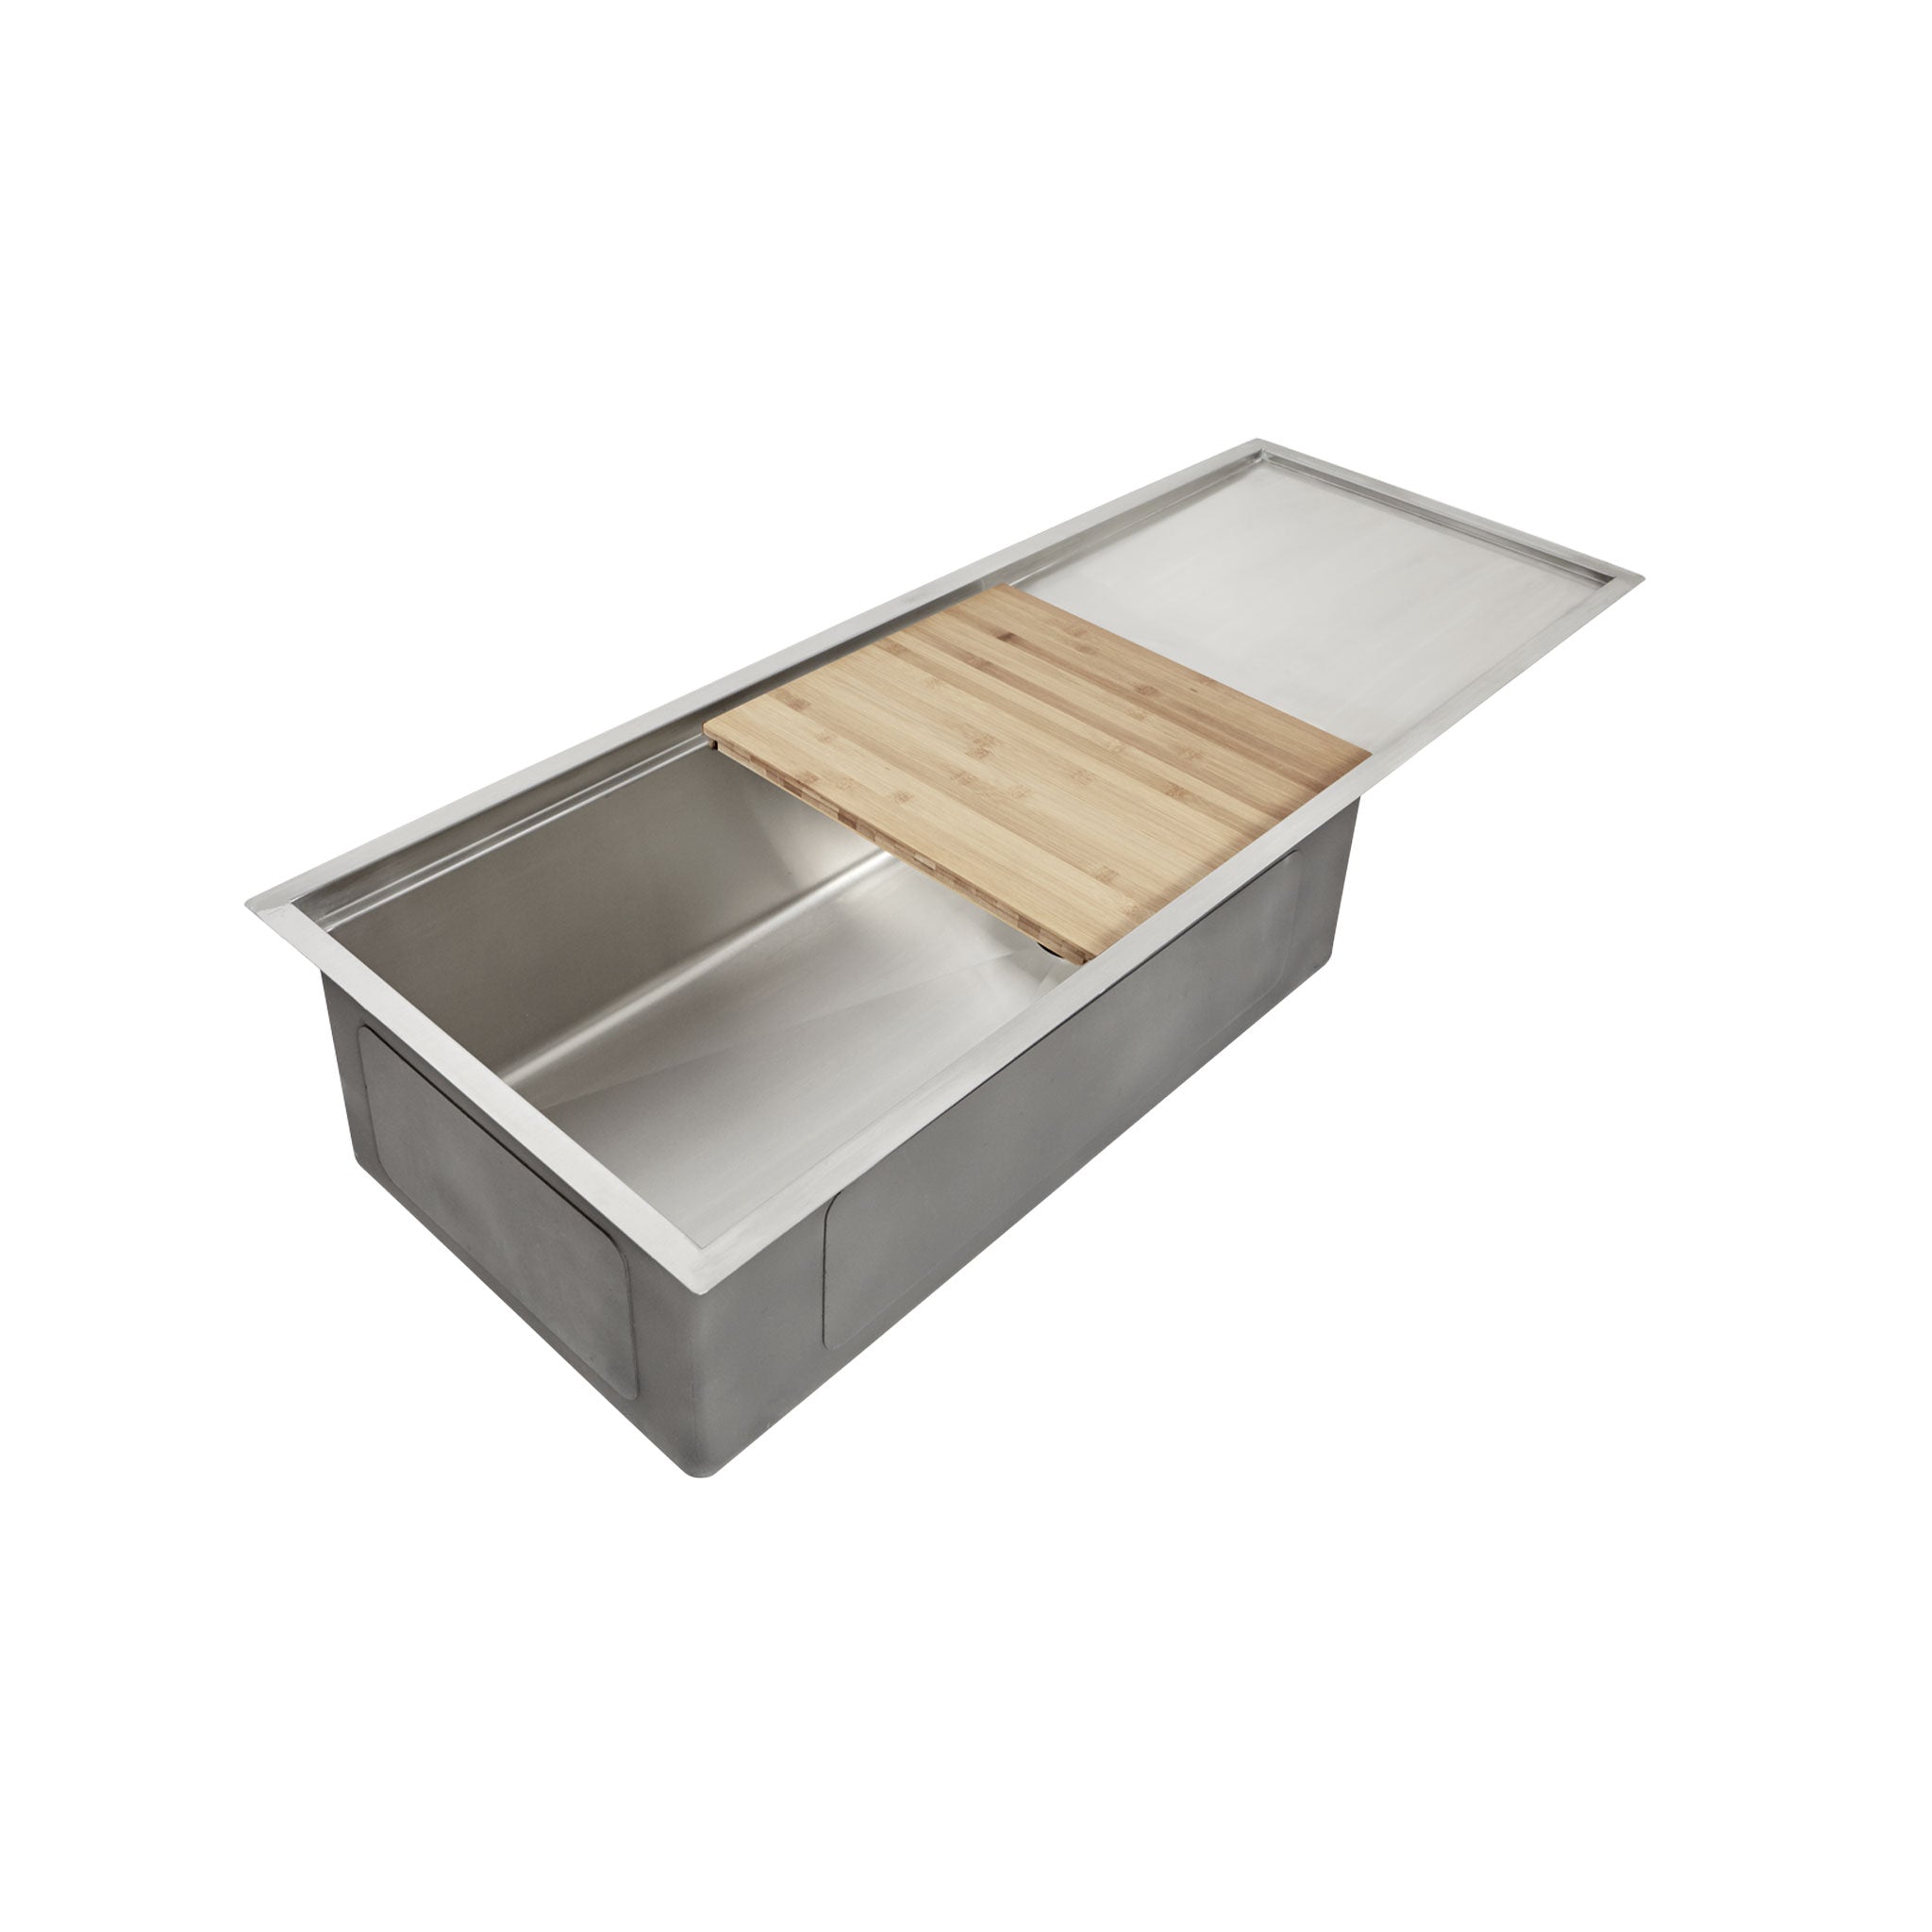 30 Inch 304 Stainless Steel Drainboard sink with a bamboo cutting board